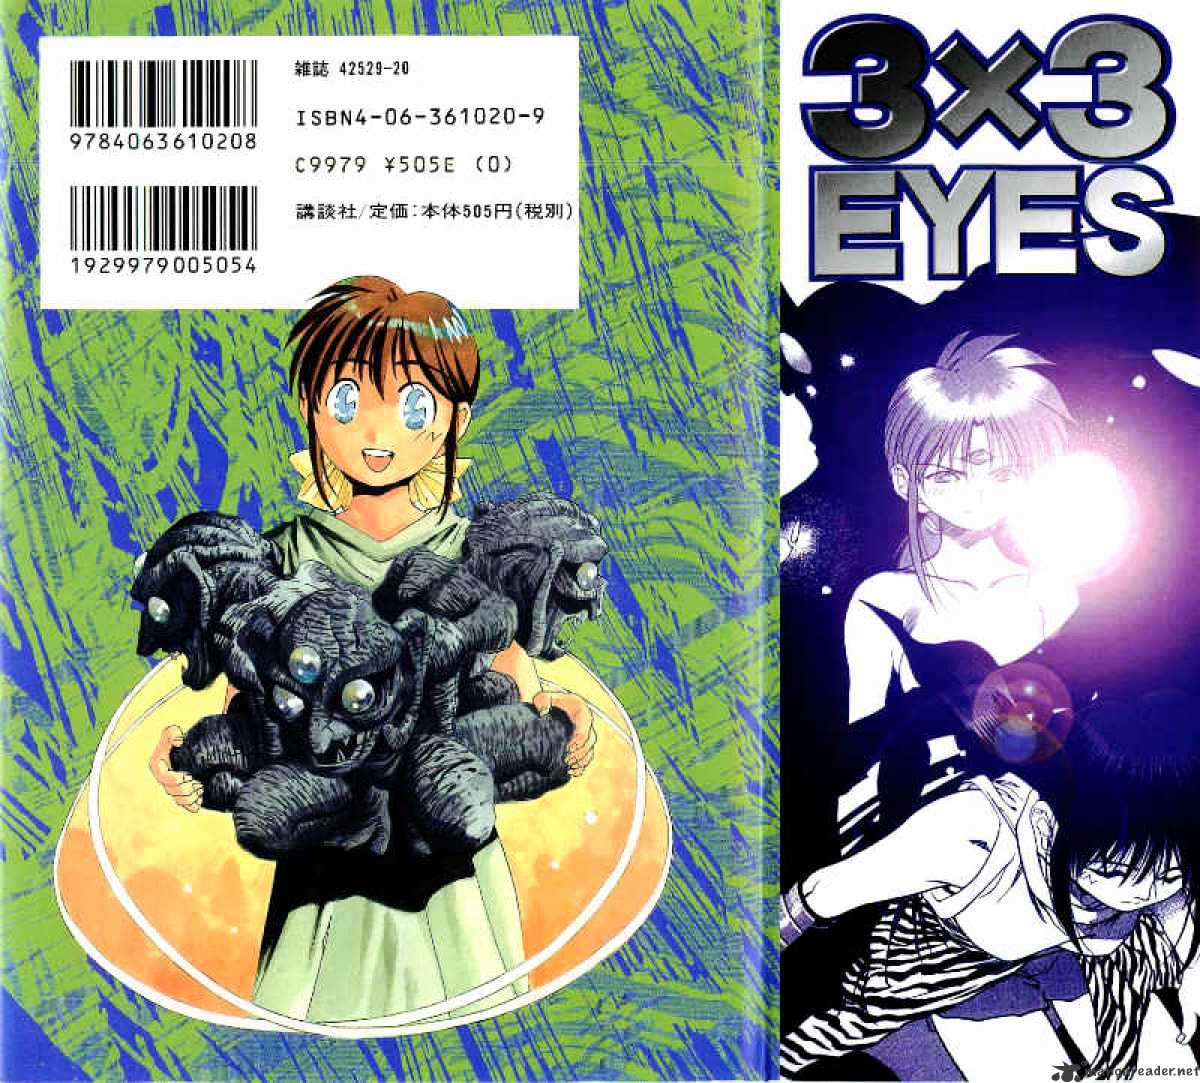 3X3 Eyes Chapter 539 #2